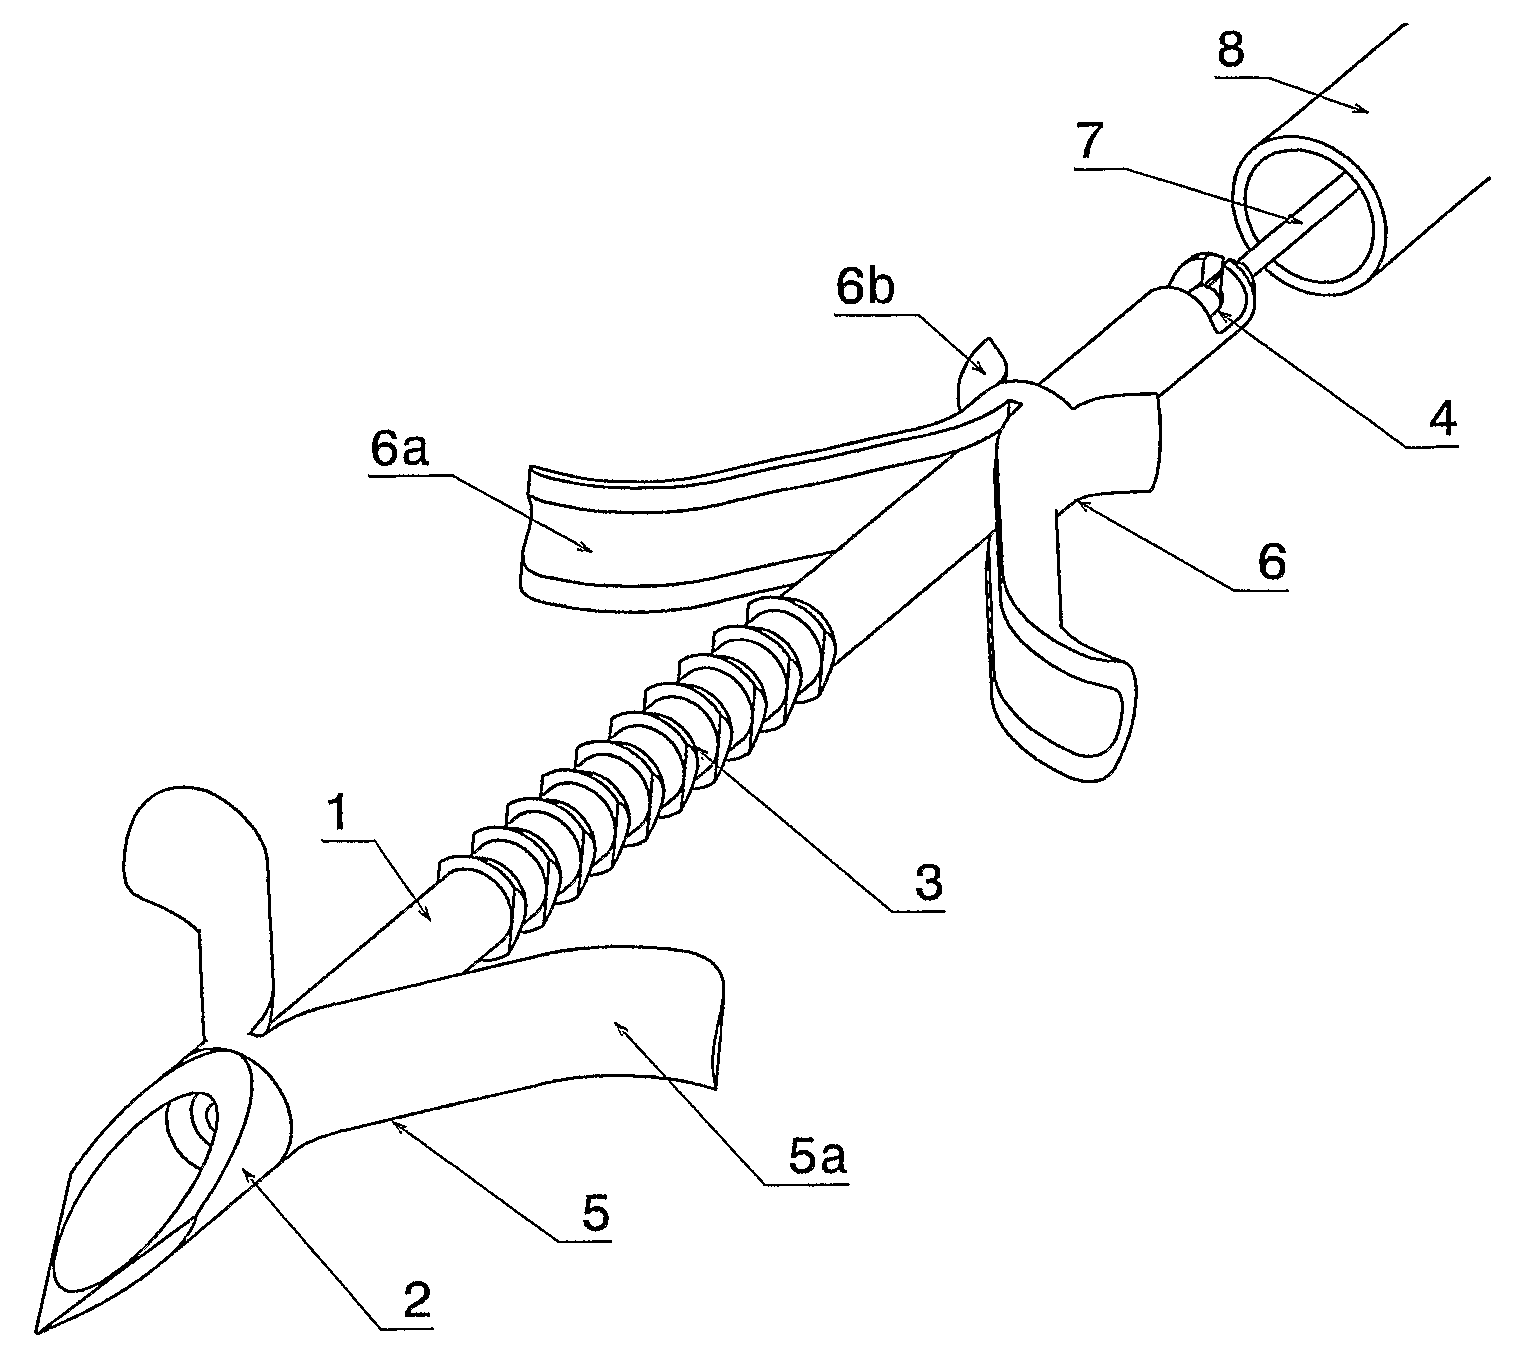 Blind rivet for adapting biological tissue and device for setting the same, in particular through the instrument channel of an endoscope